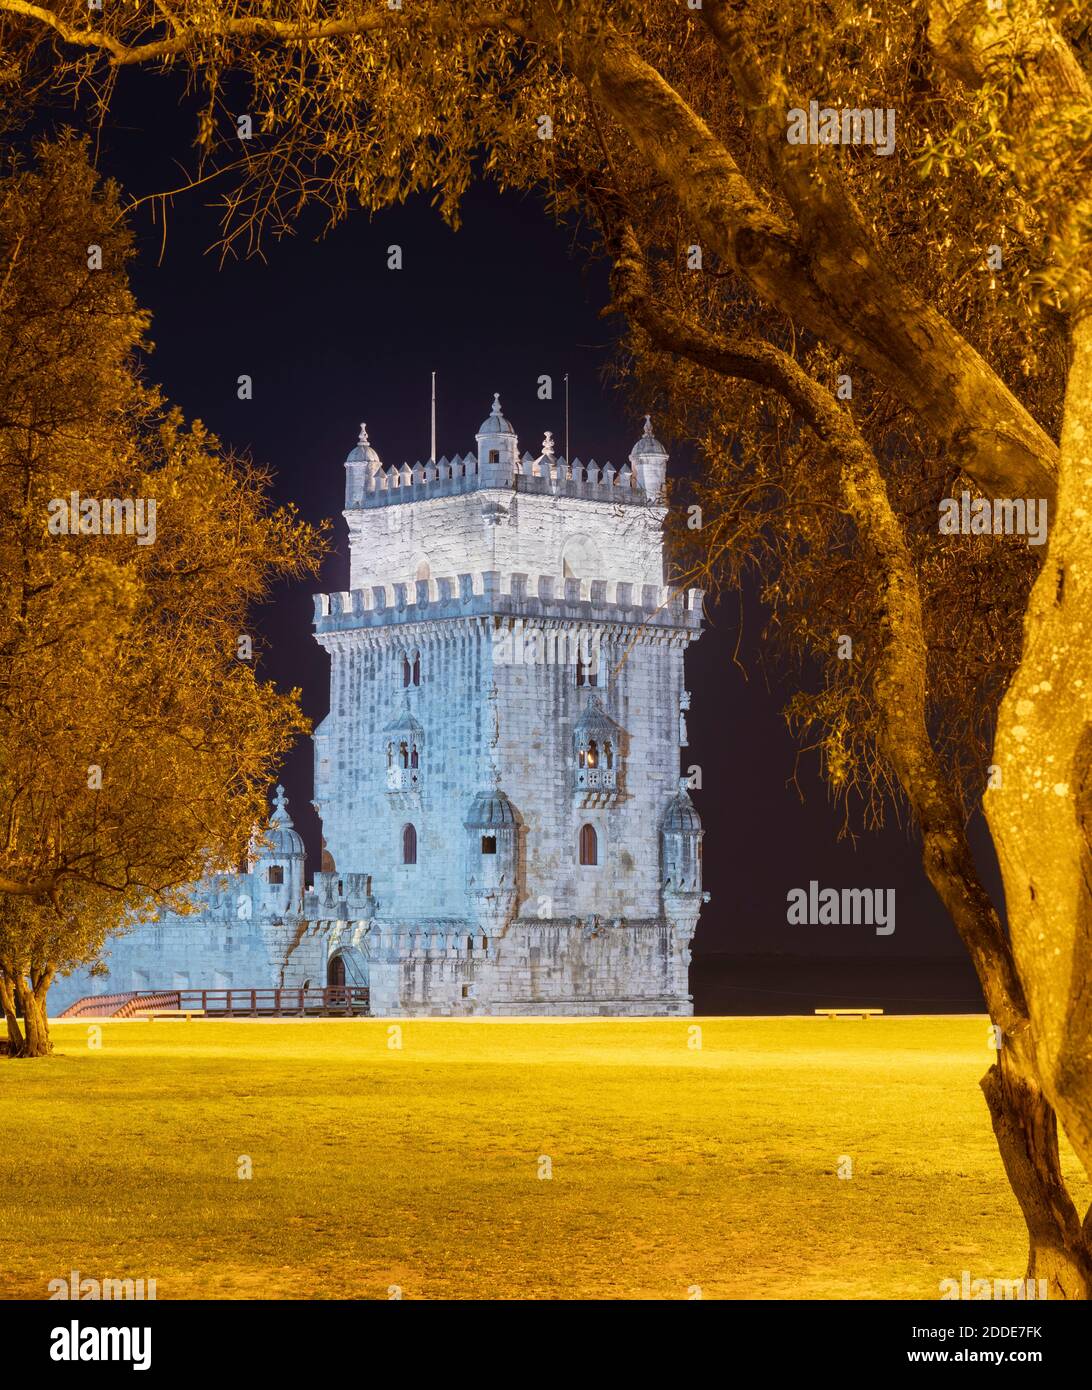 Portugal, Lisbon District, Lisbon, Panorama of Belem Tower at night Stock Photo